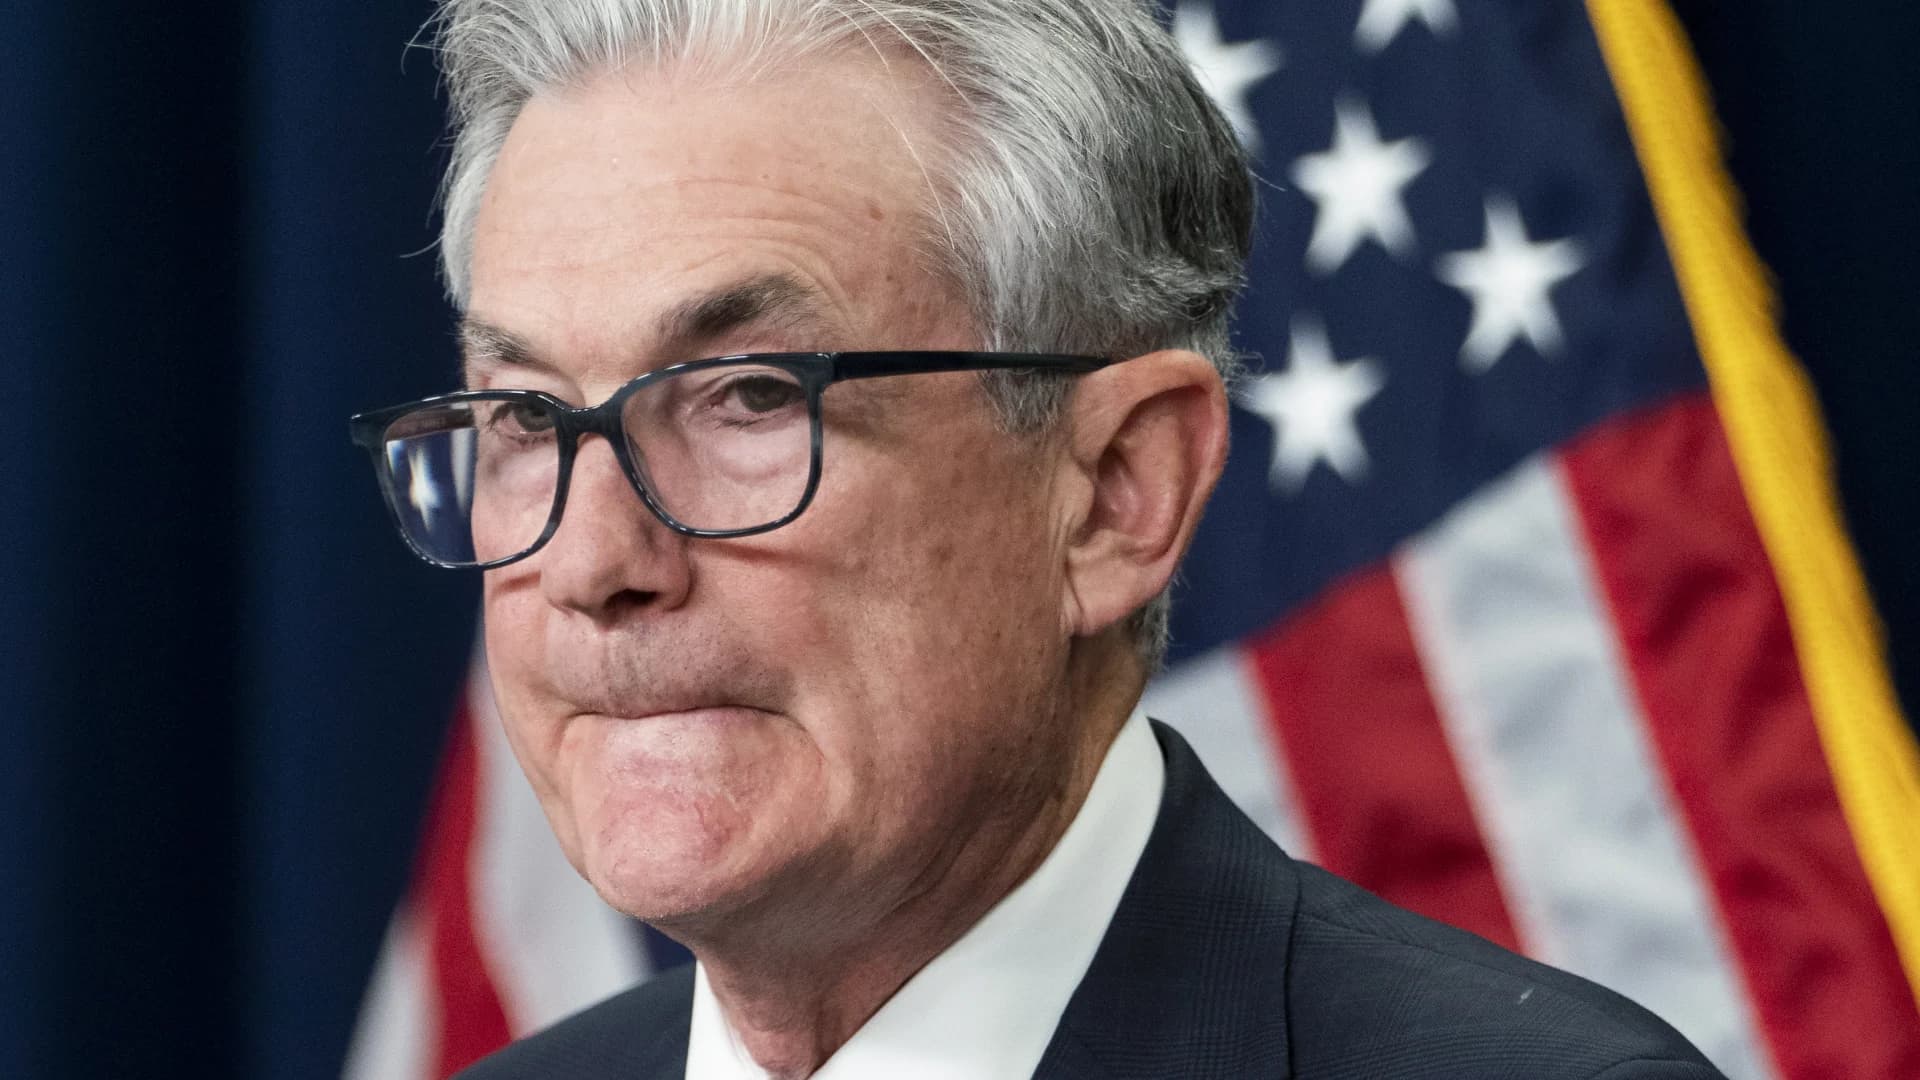 Powell: Fed will decide on rate hikes 'meeting by meeting'